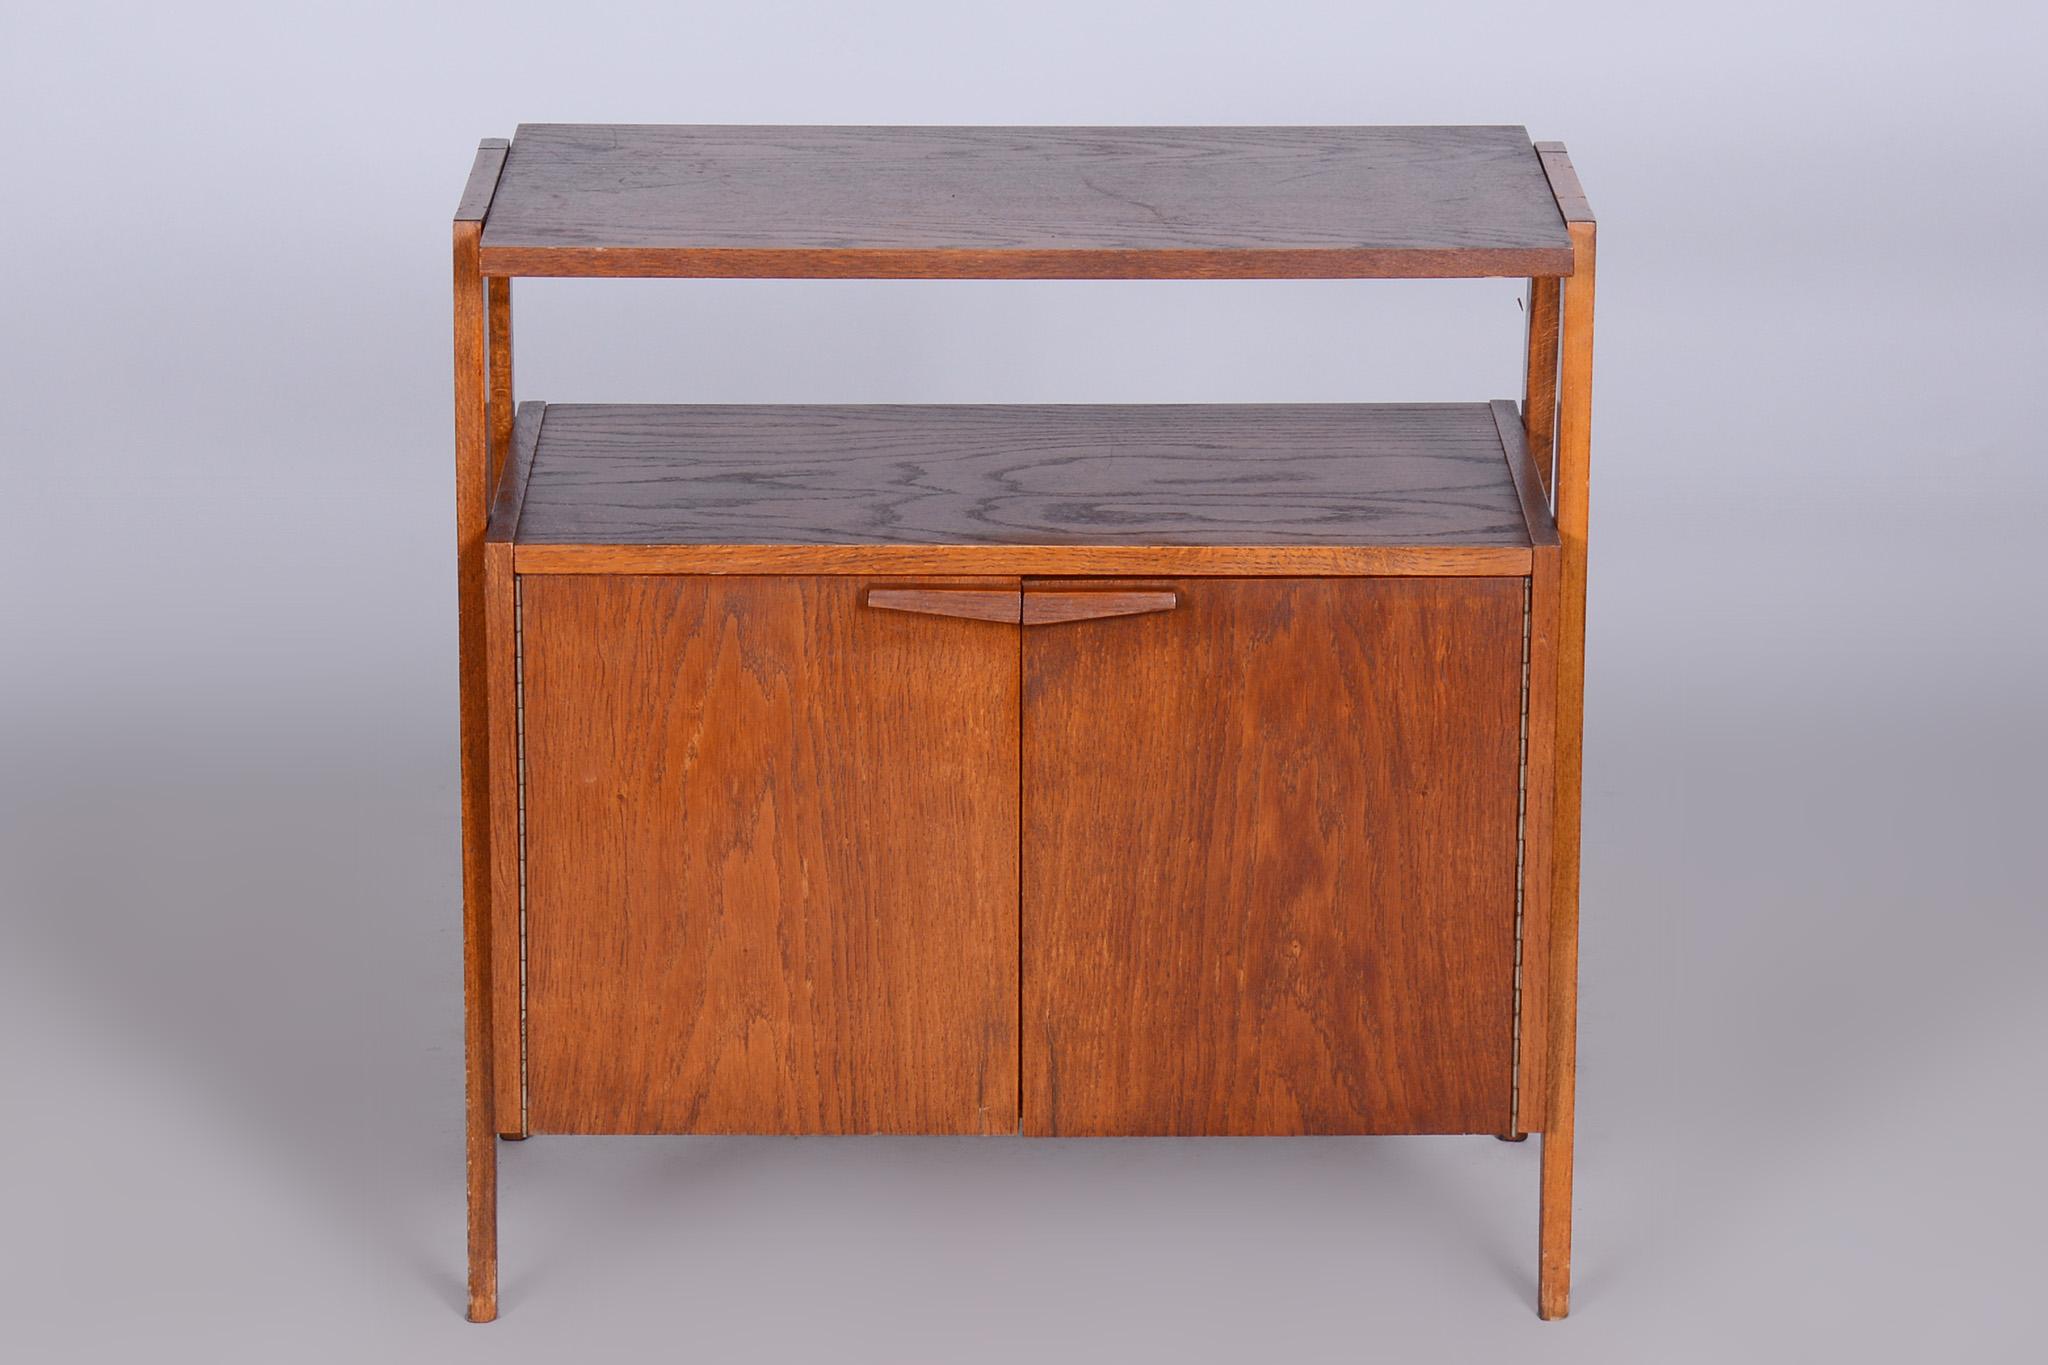 Restored midcentury small cabinet By Tatra Pravenec.

Period: 1950-1959
Maker: Tatra Pravenec
Source: Czechia
Material: Stained oak

Very well-preserved original condition. Revived polish.
 